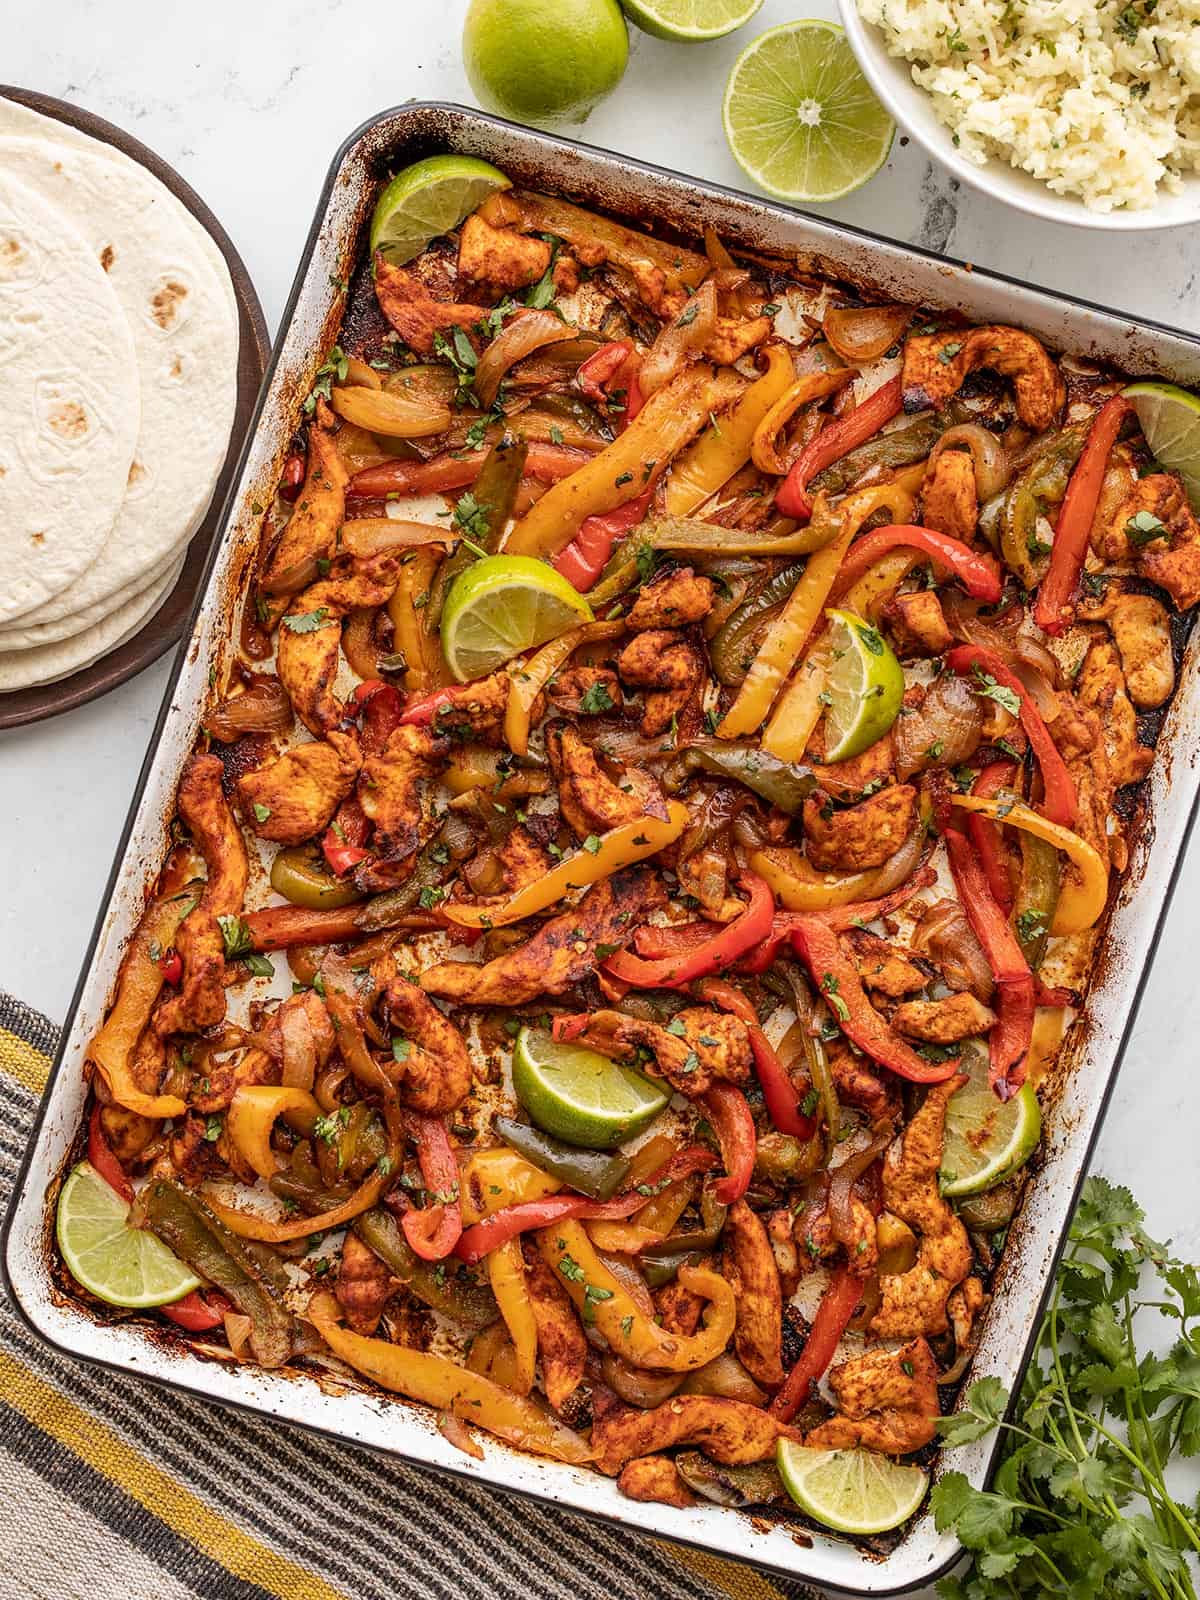 A sheet pan full of fajita chicken, onions, and peppers